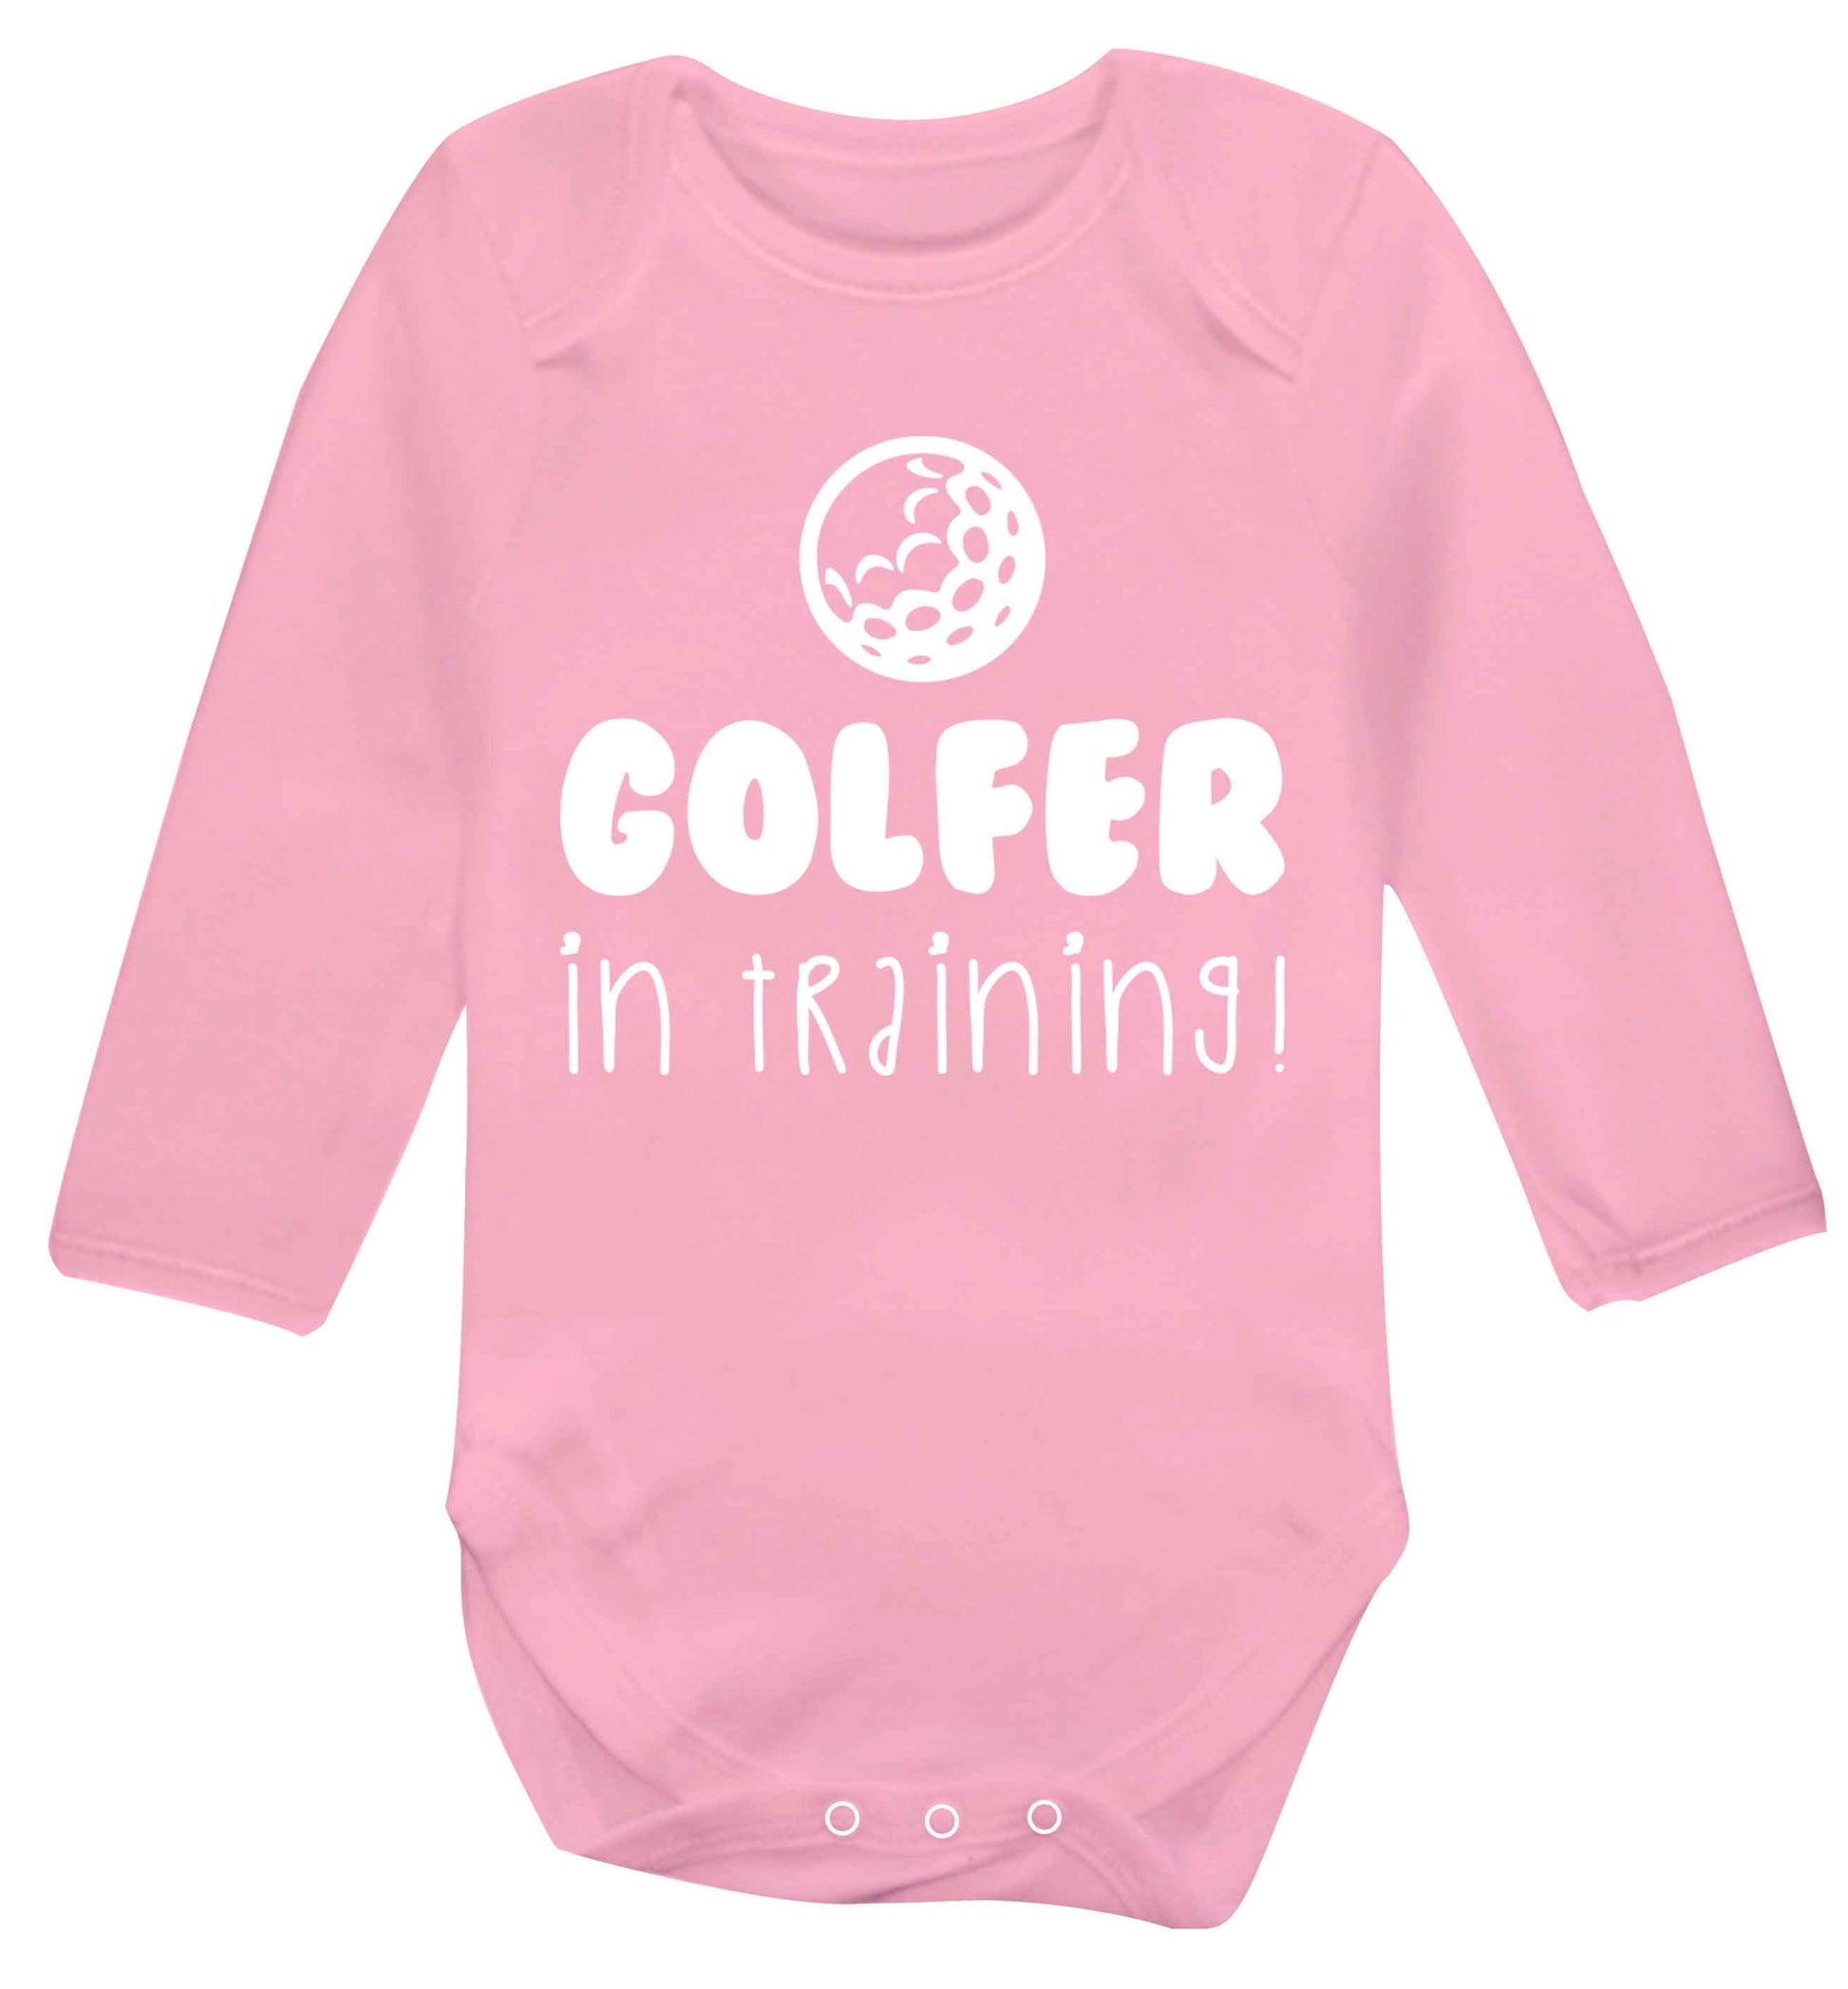 Golfer in training Baby Vest long sleeved pale pink 6-12 months